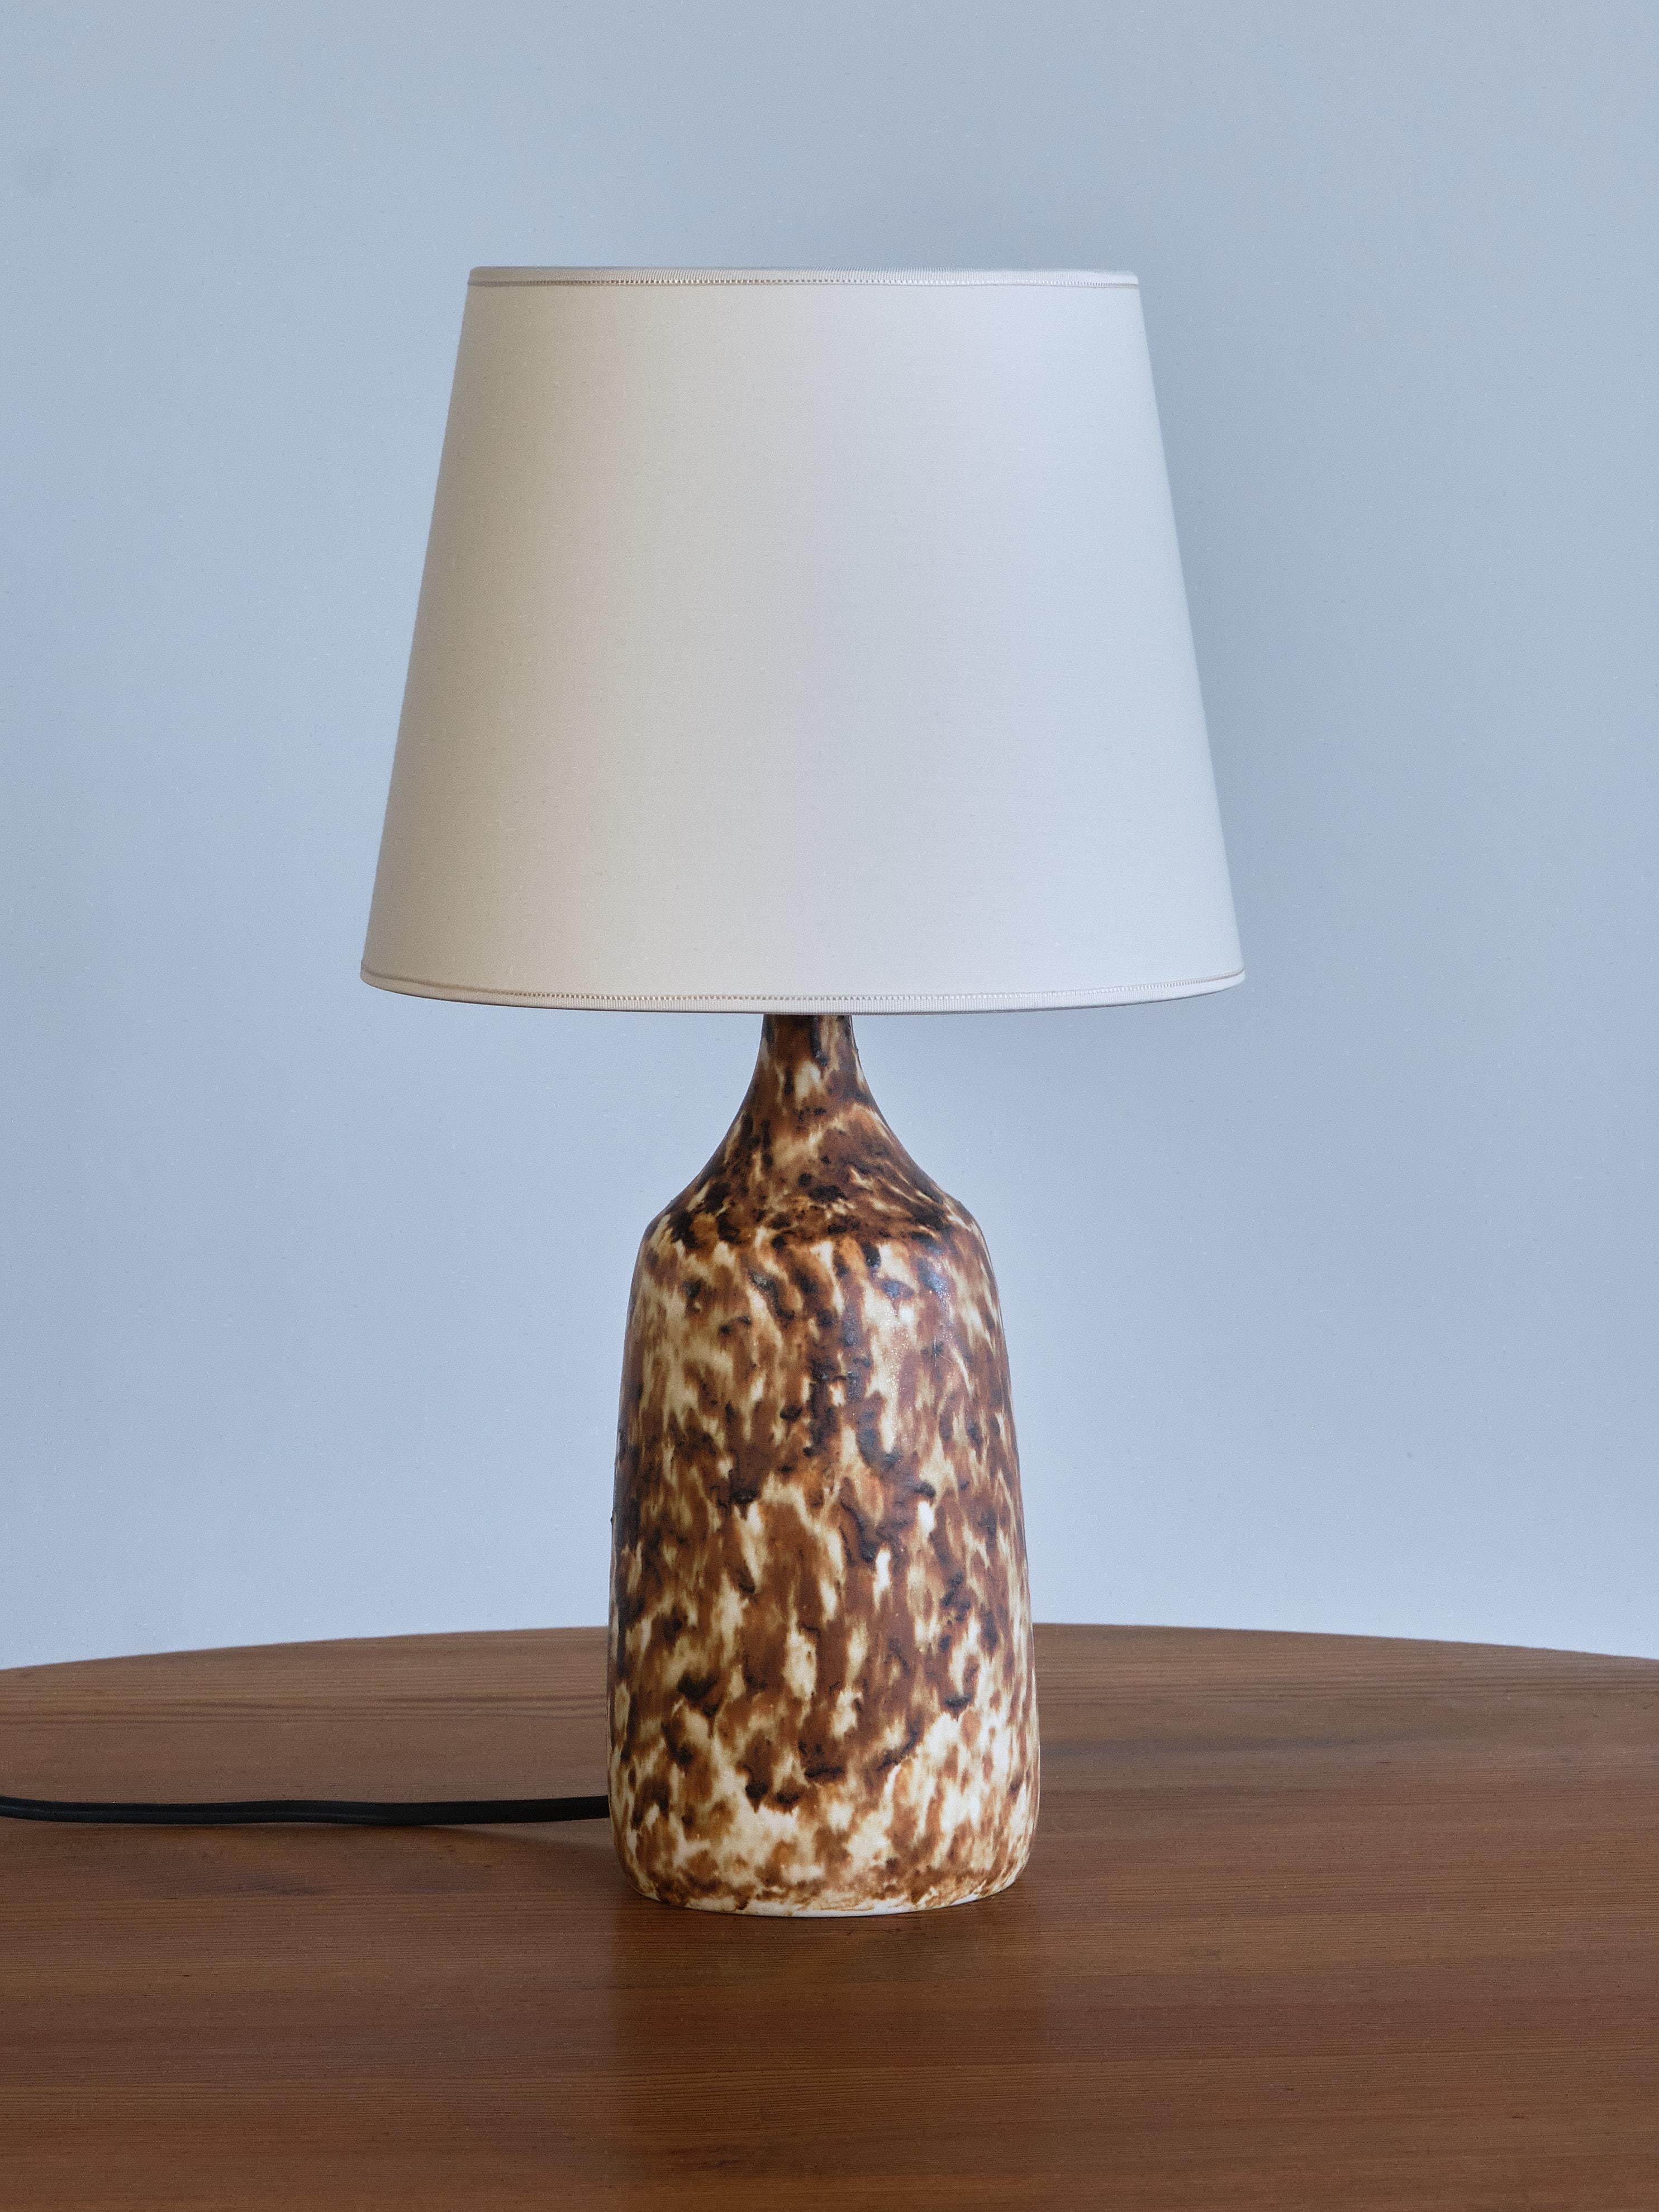 This rare table lamp was designed by Gunnar Borg and produced by his own ceramic workshop 'Gunnars Keramik' in Höganäs, Sweden in the 1960s. The piece is signed on the bottom of the base.

The hand-turned stoneware base is made of sandstone and has